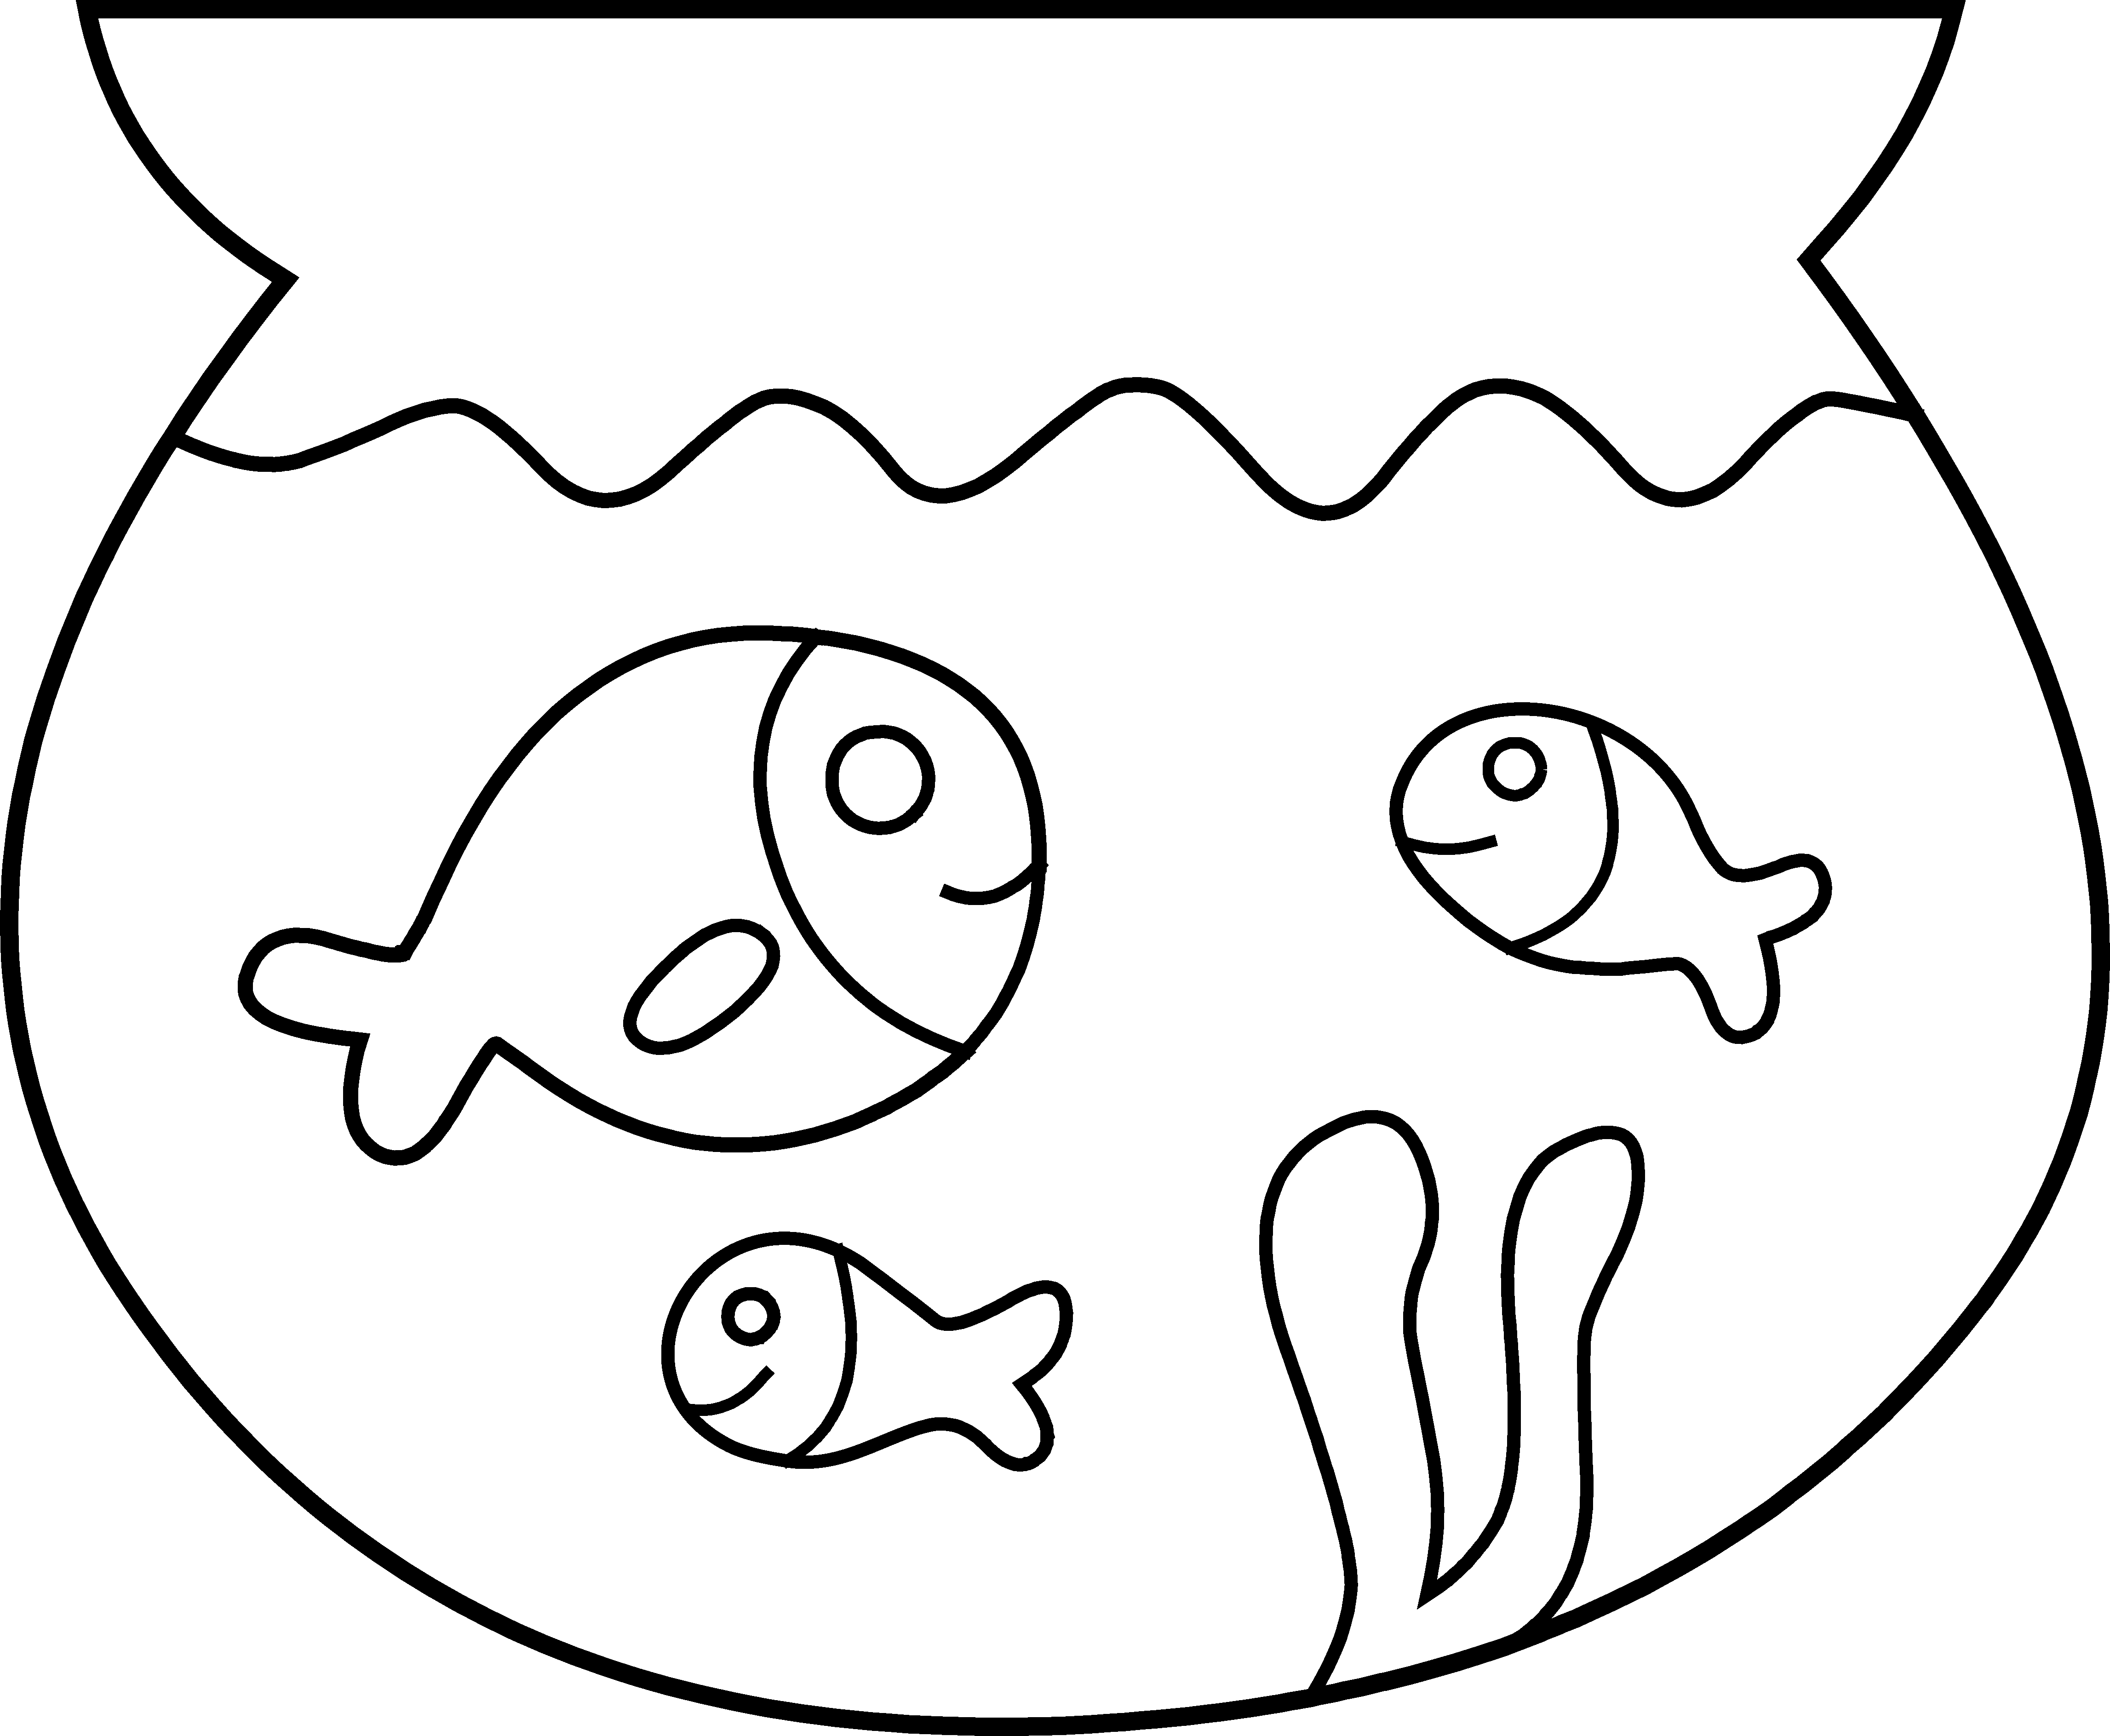 Fish clipart easy. Cliparts free download clip